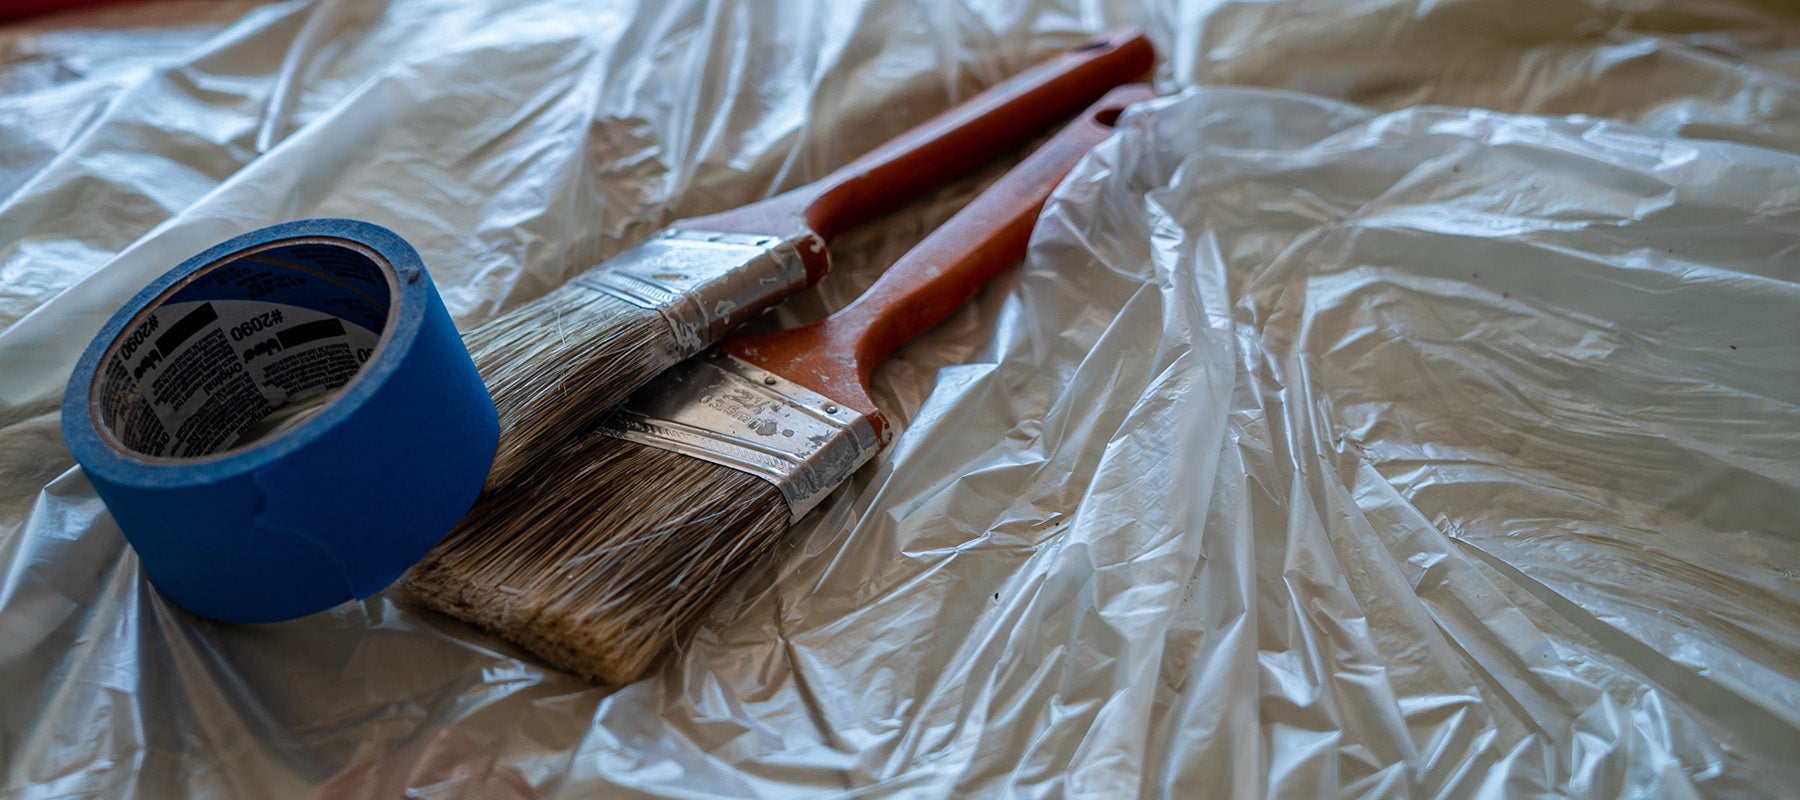 Painter's tape and two paint brushes placed on top of a plastic drop cloth.